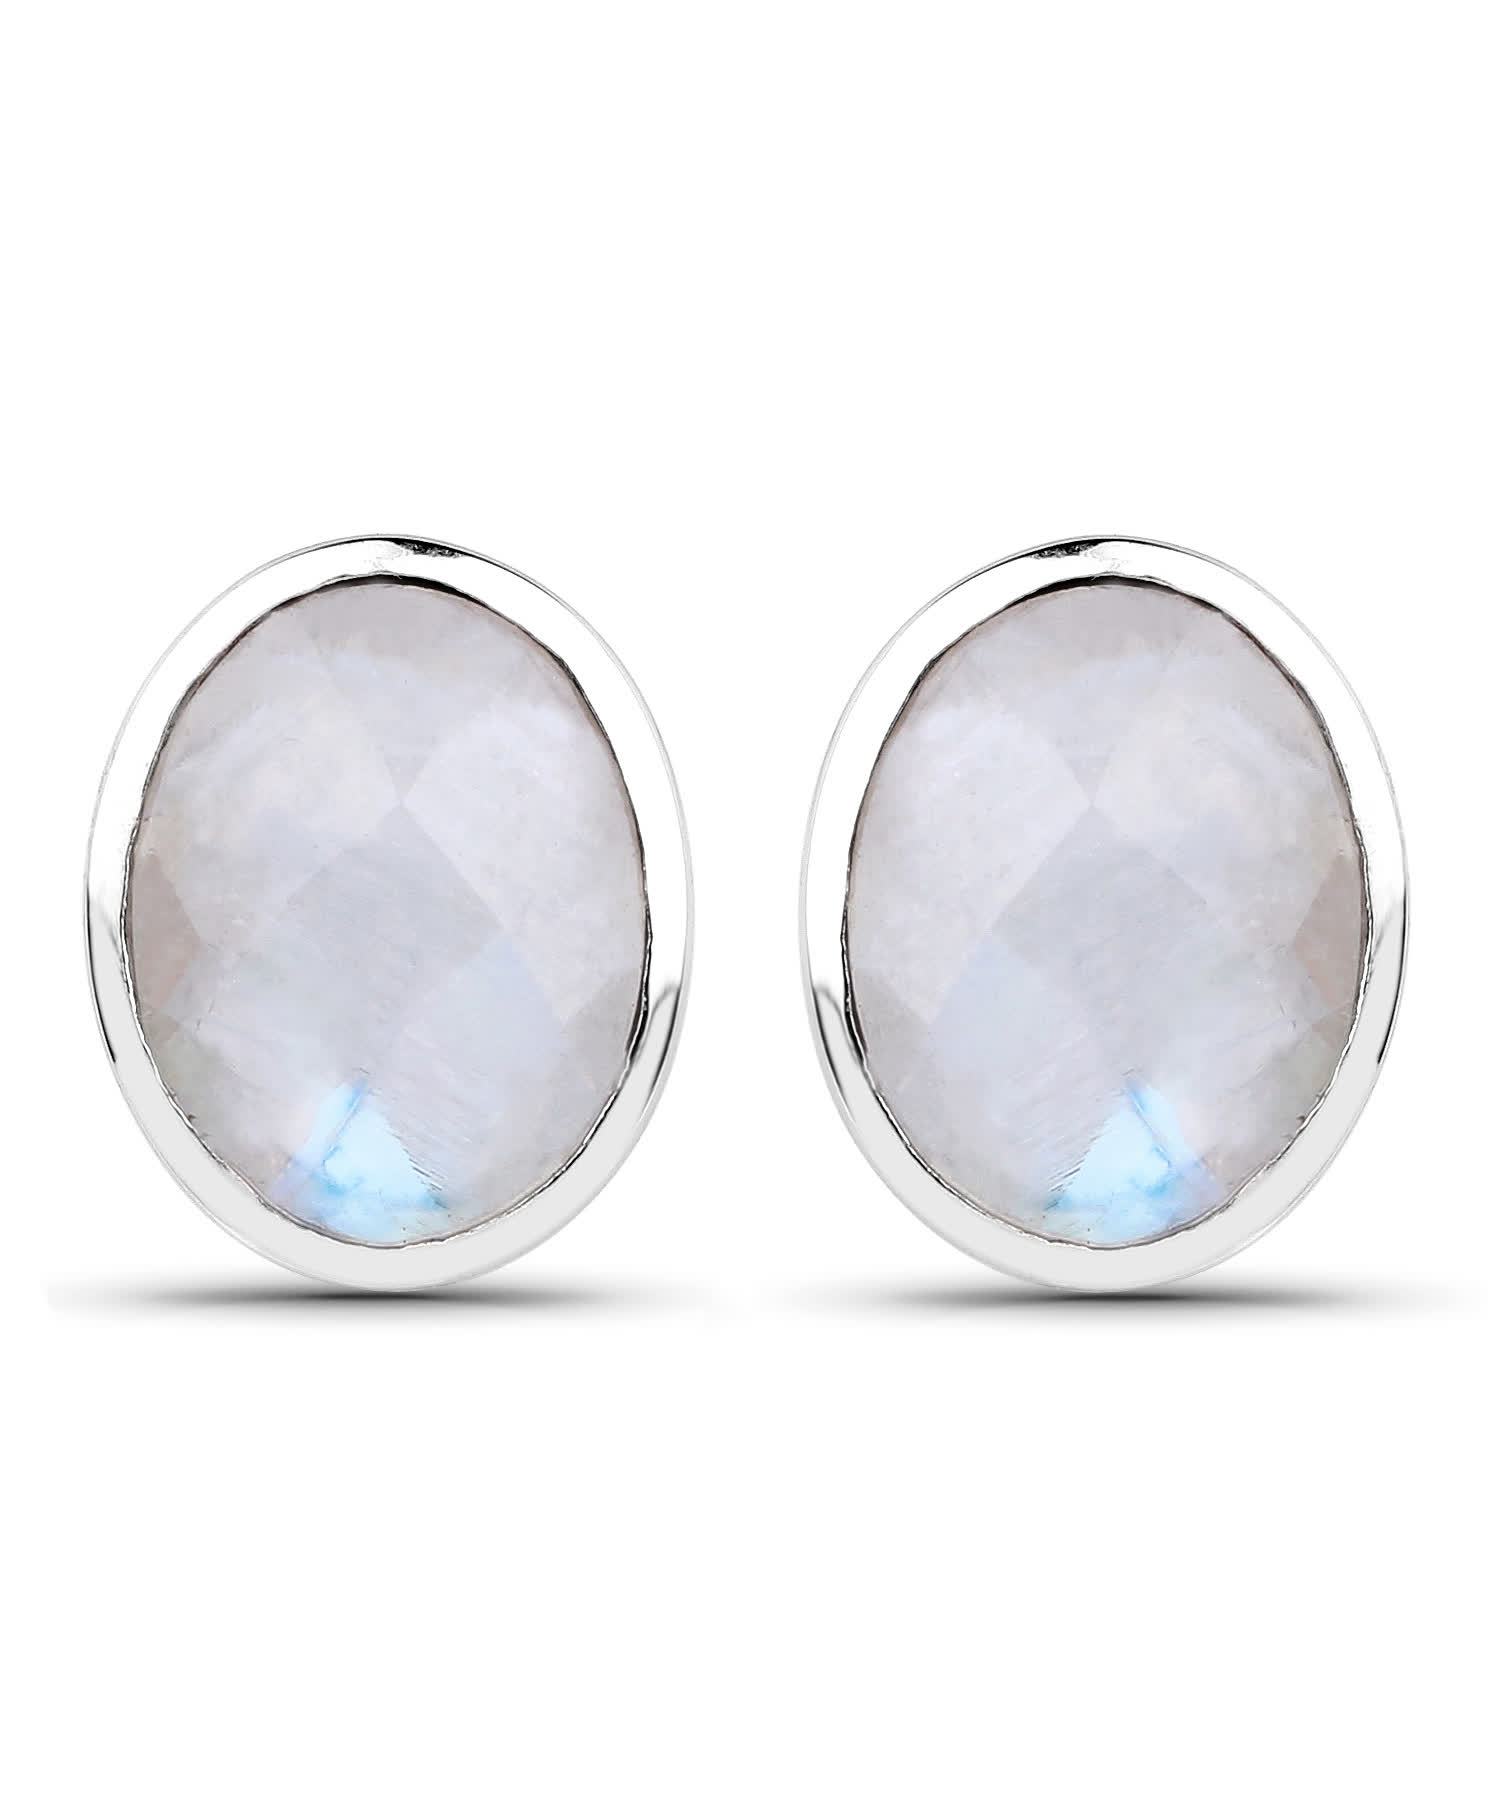 4.05ctw Natural Moonstone Rhodium Plated 925 Sterling Silver Stud Earrings View 1